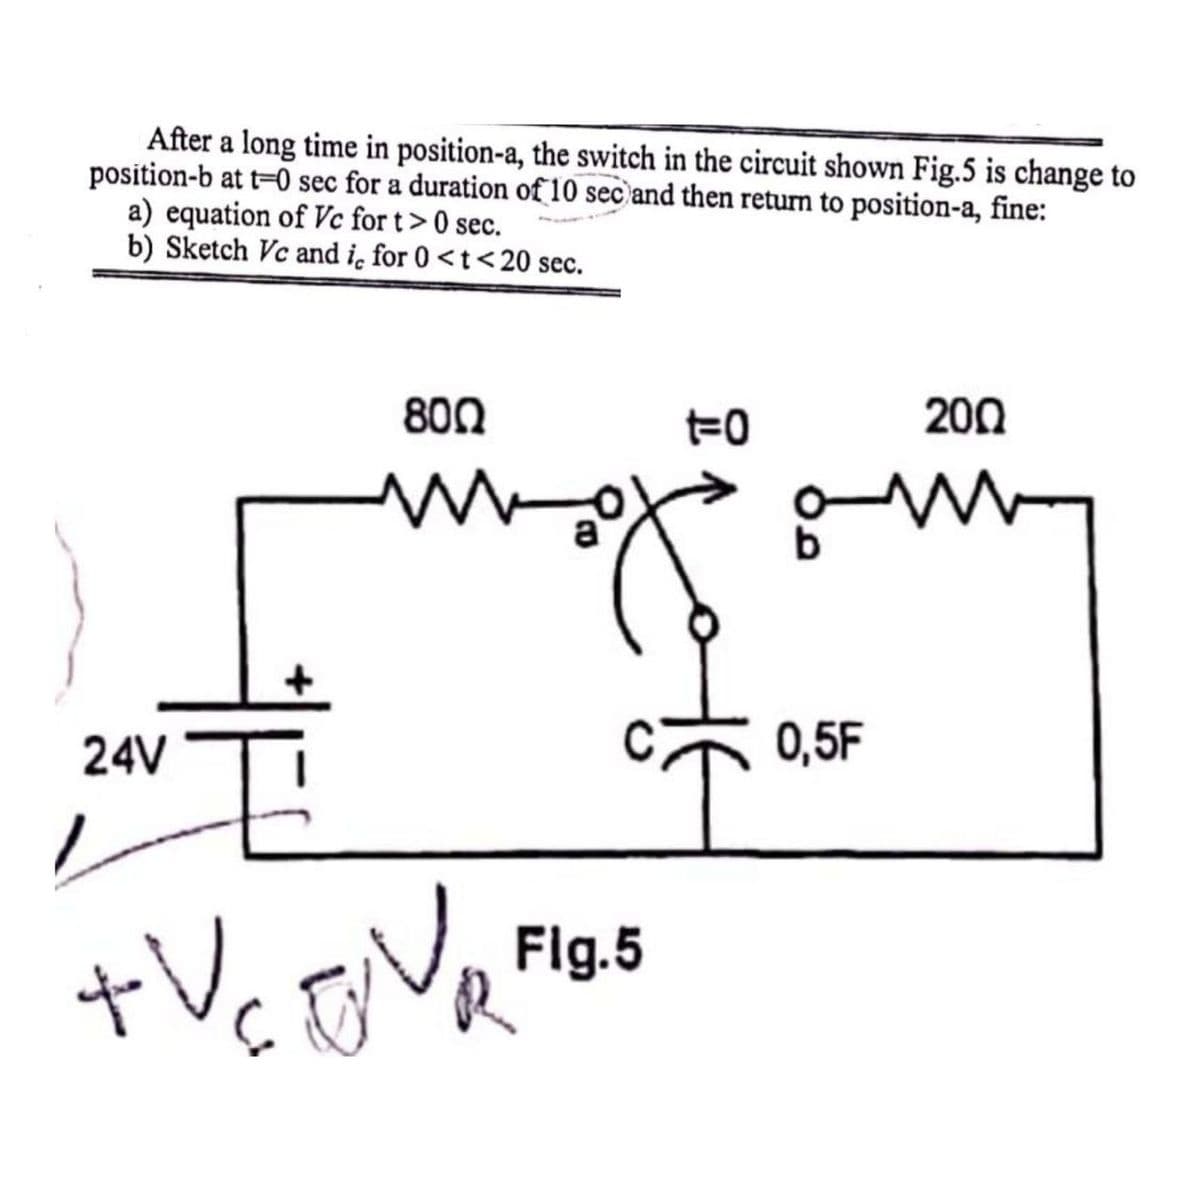 After a long time in position-a, the switch in the circuit shown Fig.5 is change to
position-b at t=0 sec for a duration of 10 sec) and then return to position-a, fine:
a) equation of Vc for t> 0 sec.
b) Sketch Vc and ic for 0 <t<20 sec.
800
200
24V
+V₂ DVR
ra
Fig.5
요
t-0
0,5F